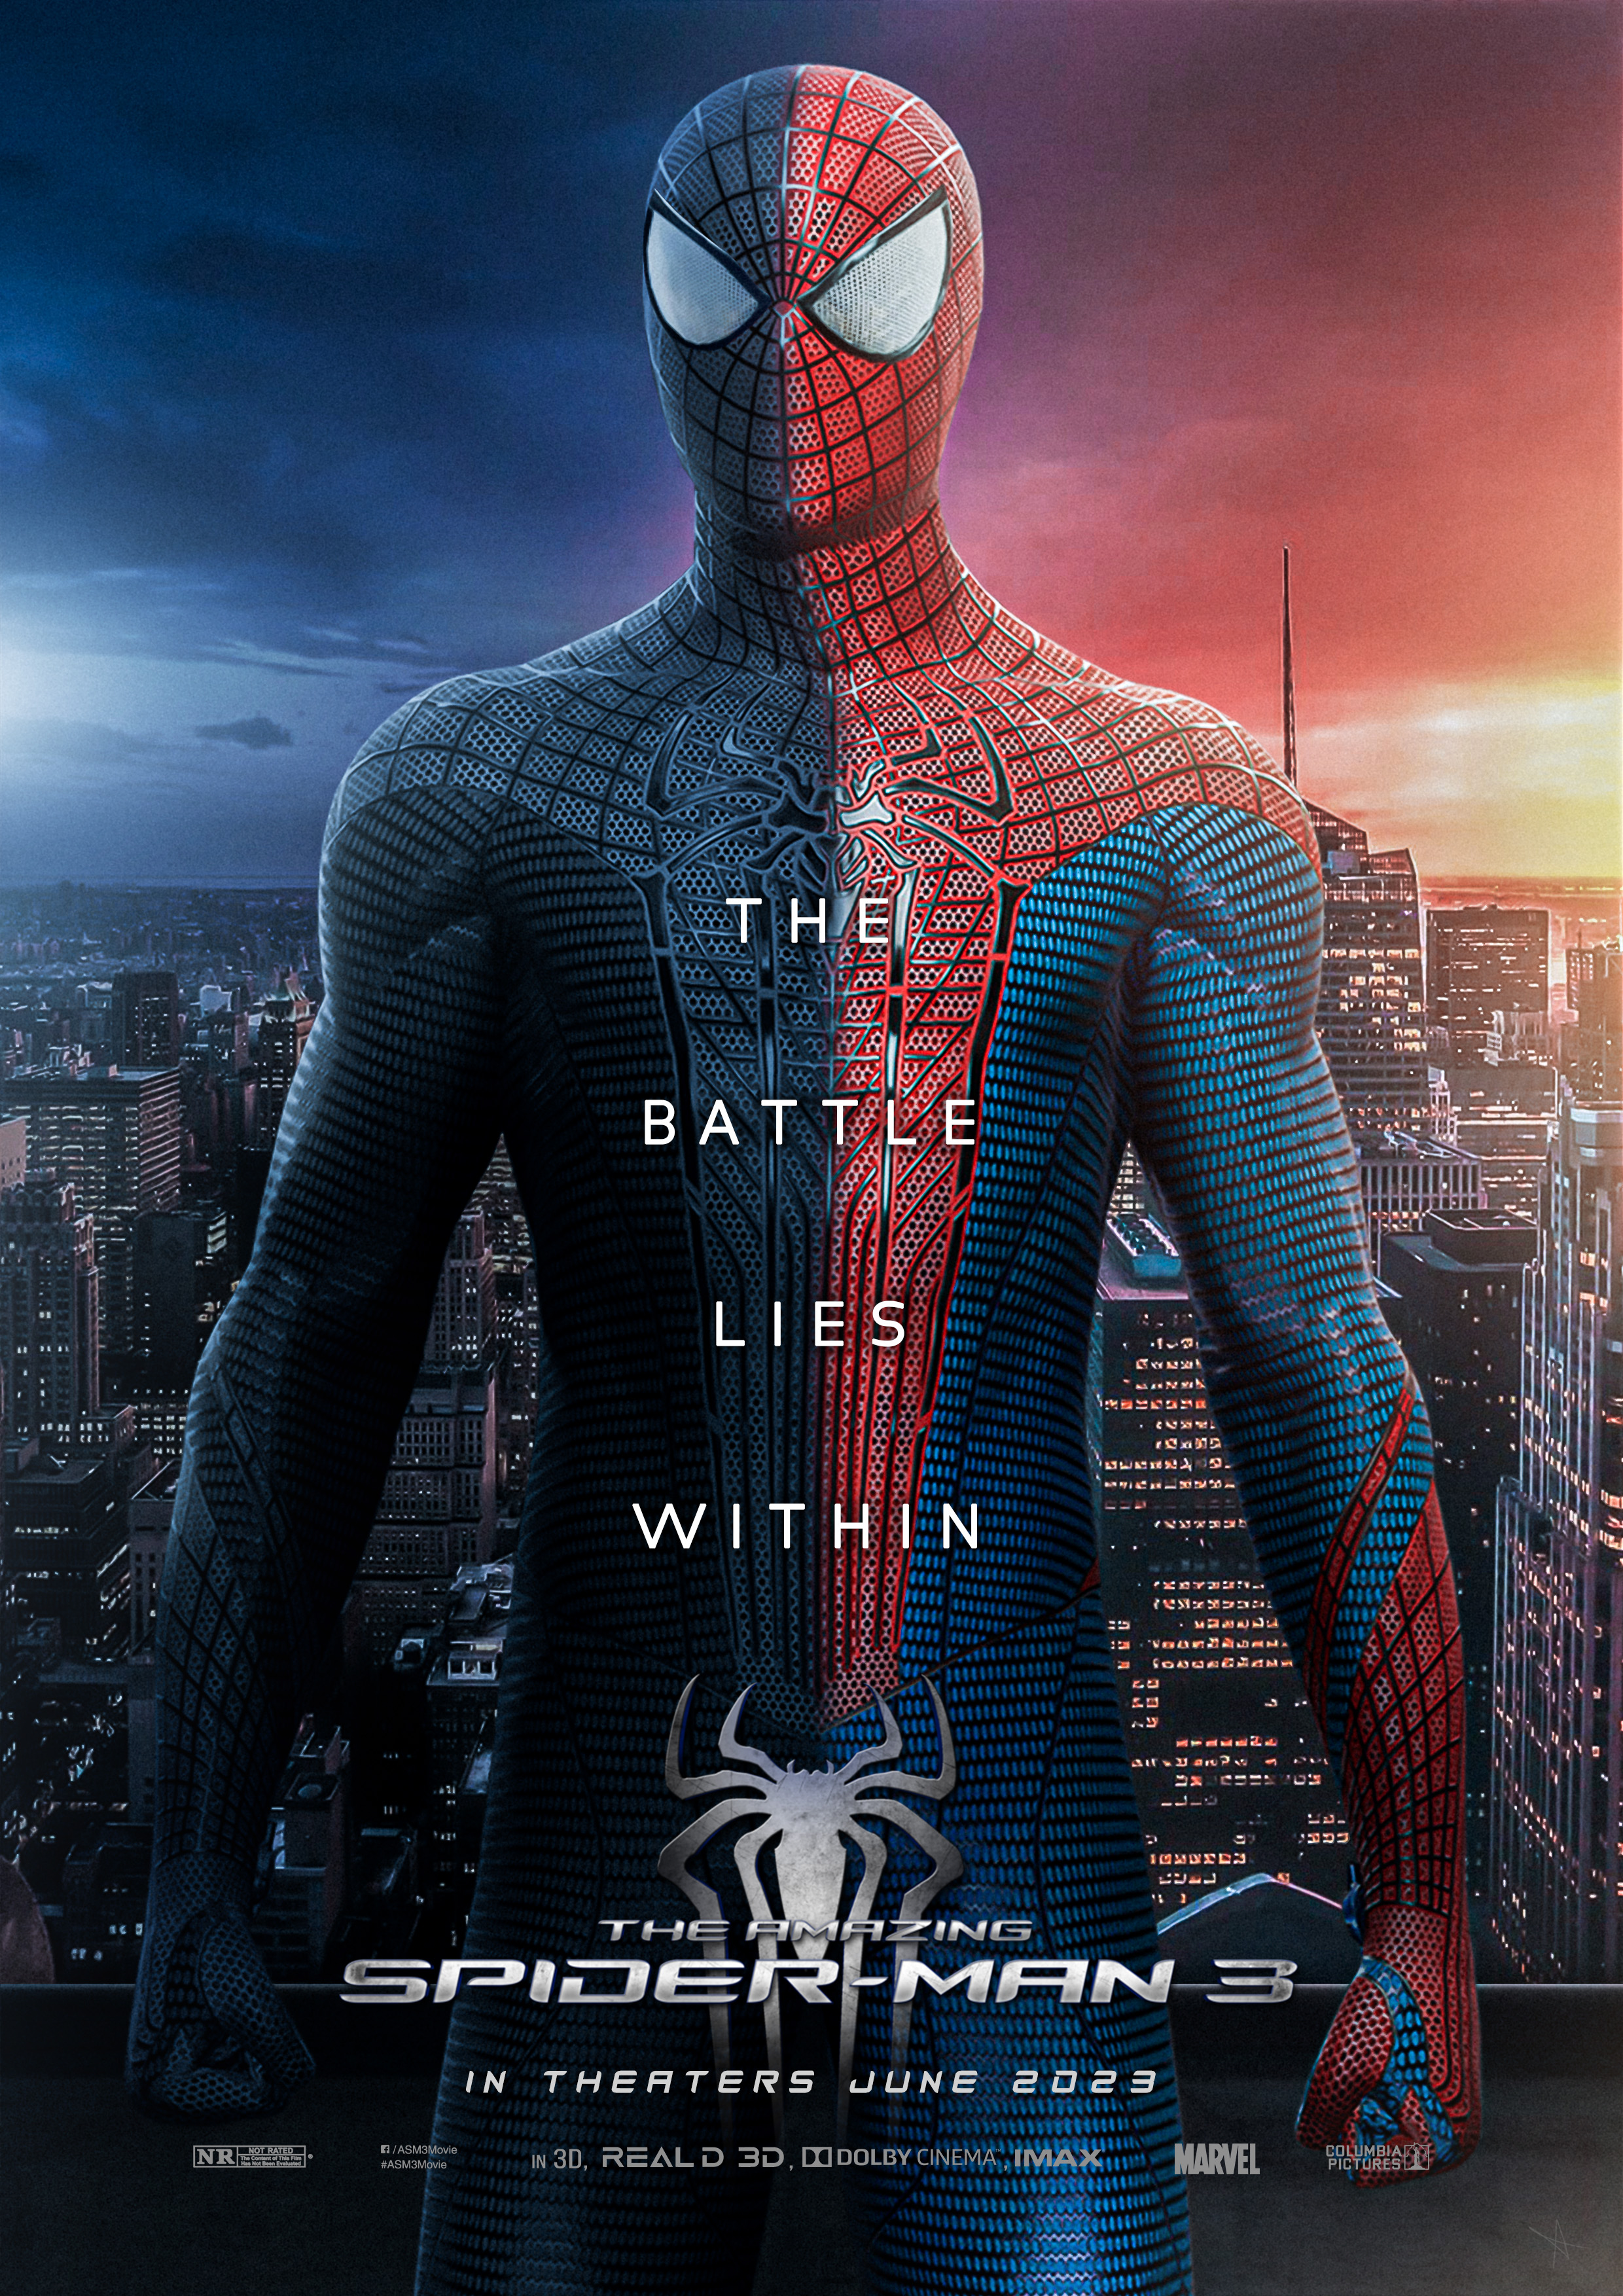 The Amazing Spider-Man 3 - Poster Concept - PosterSpy